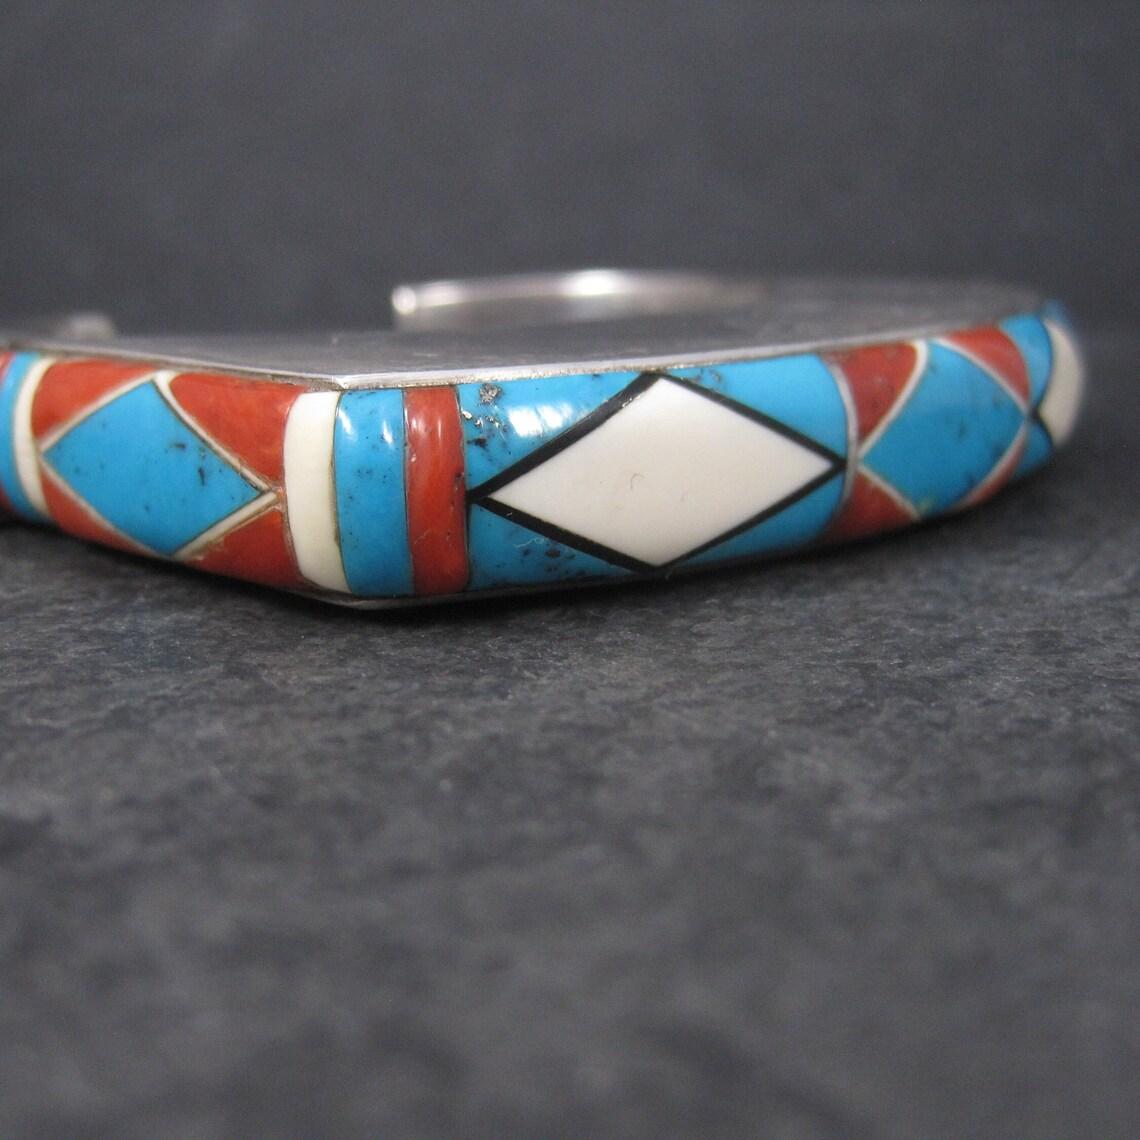 This gorgeous vintage cuff bracelet features gemstone inlay in red, white and blue with just a touch of black jet.
This piece is heavy, stunning and huge. Definitely not a bracelet for the faint of heart.

The face of this bracelet measures 1/2 of